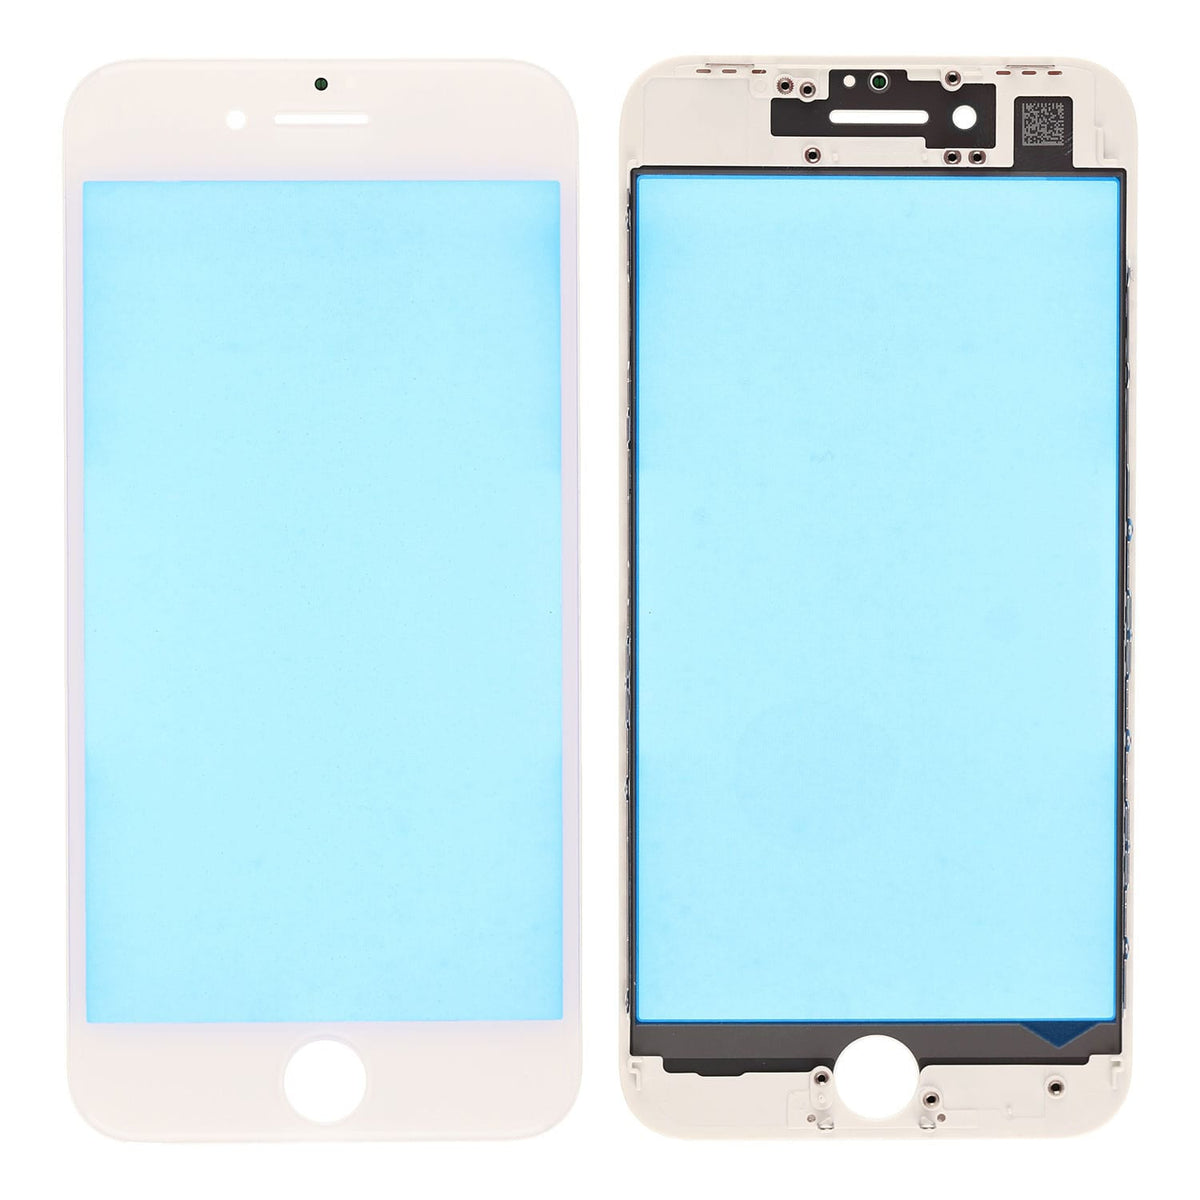 WHITE  FRONT GLASS LENS WITH SUPPORTING FRAME FOR IPHONE 8